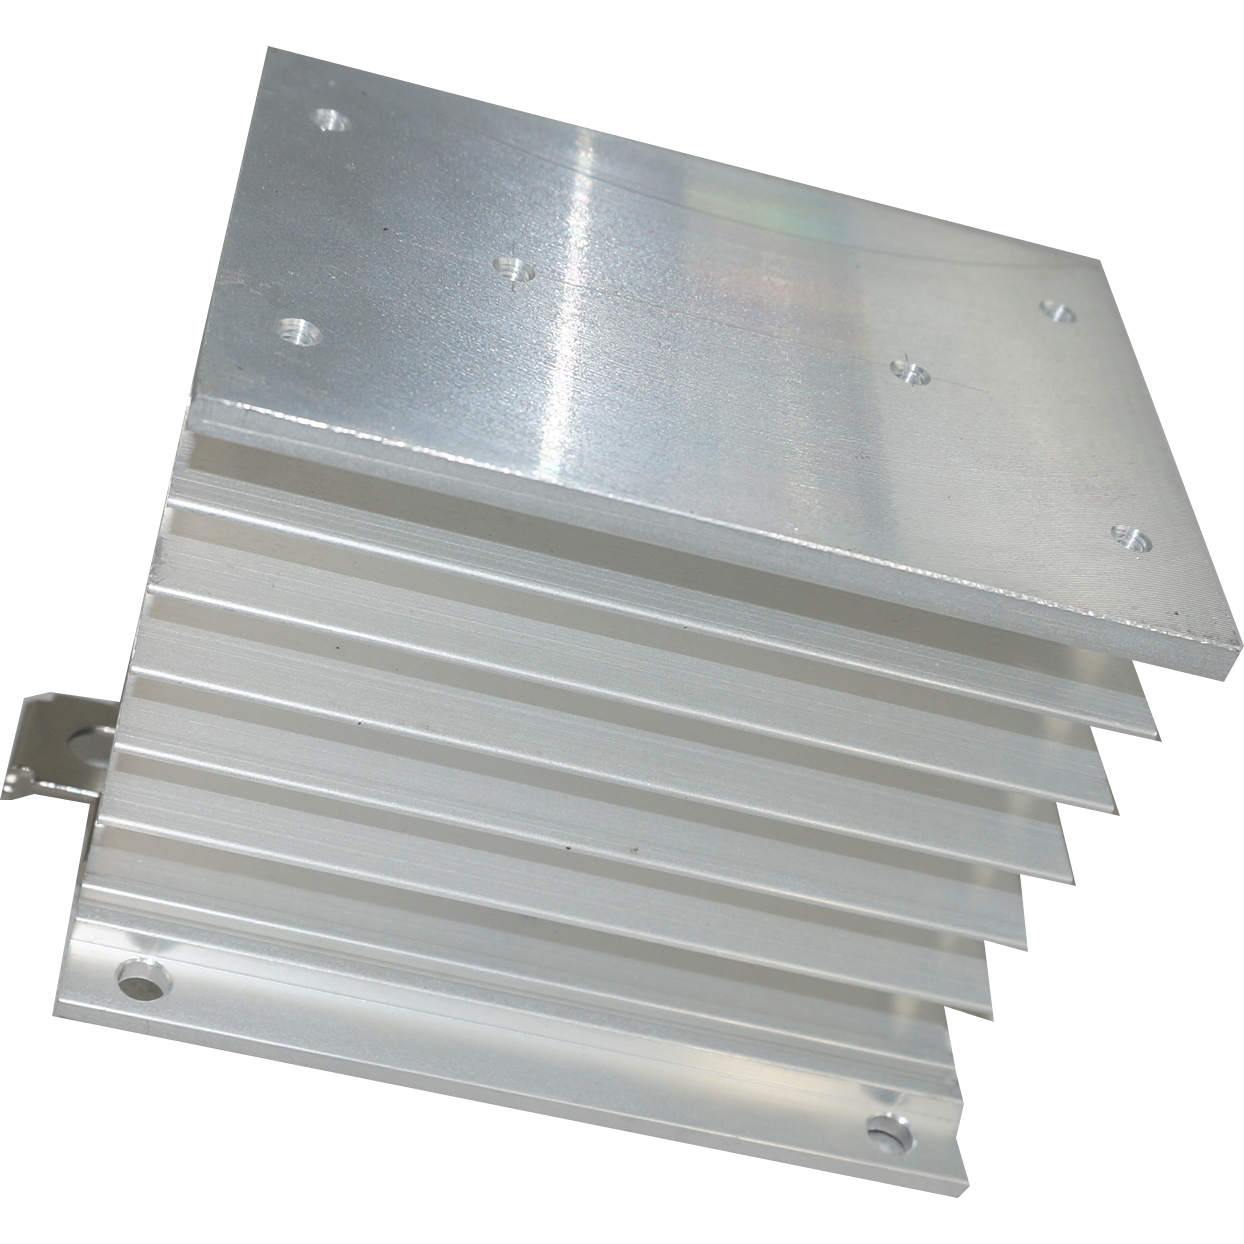 HS212DR, Heatsink 110mm, Milled, Drilled and Tapped for 3 Phase SSR, 1°C/W